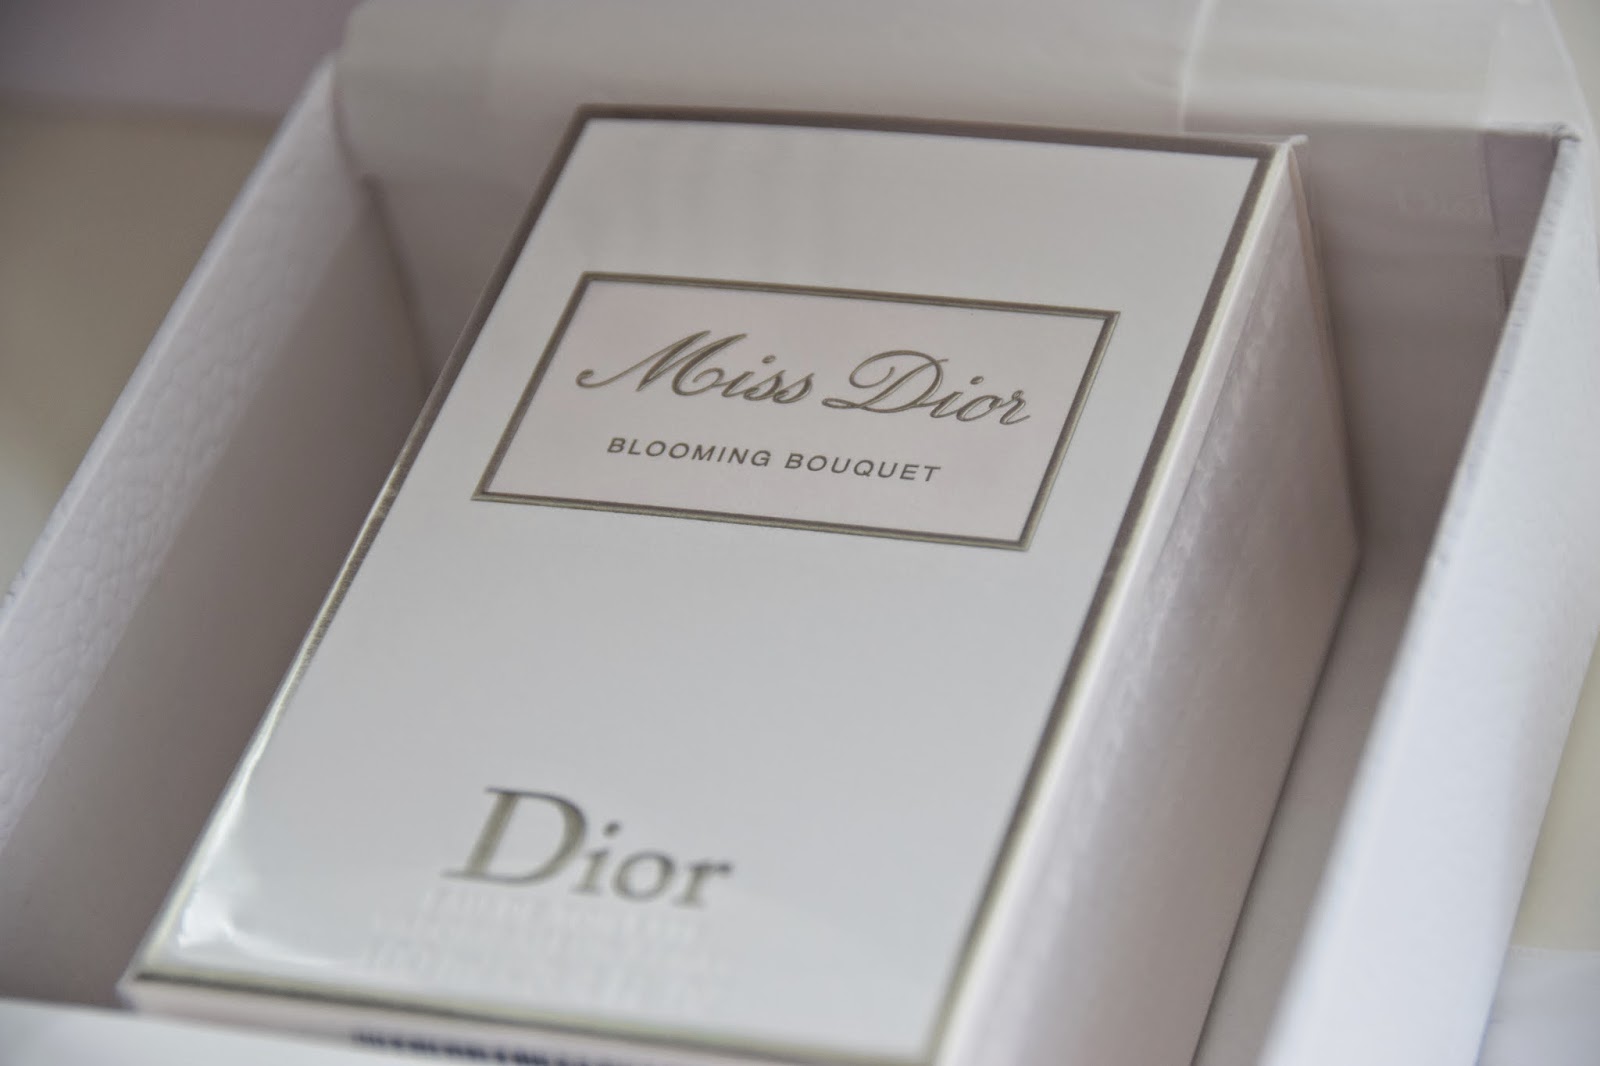 New In: Miss Dior - Blooming Bouquet | The Fashion Freak Diary